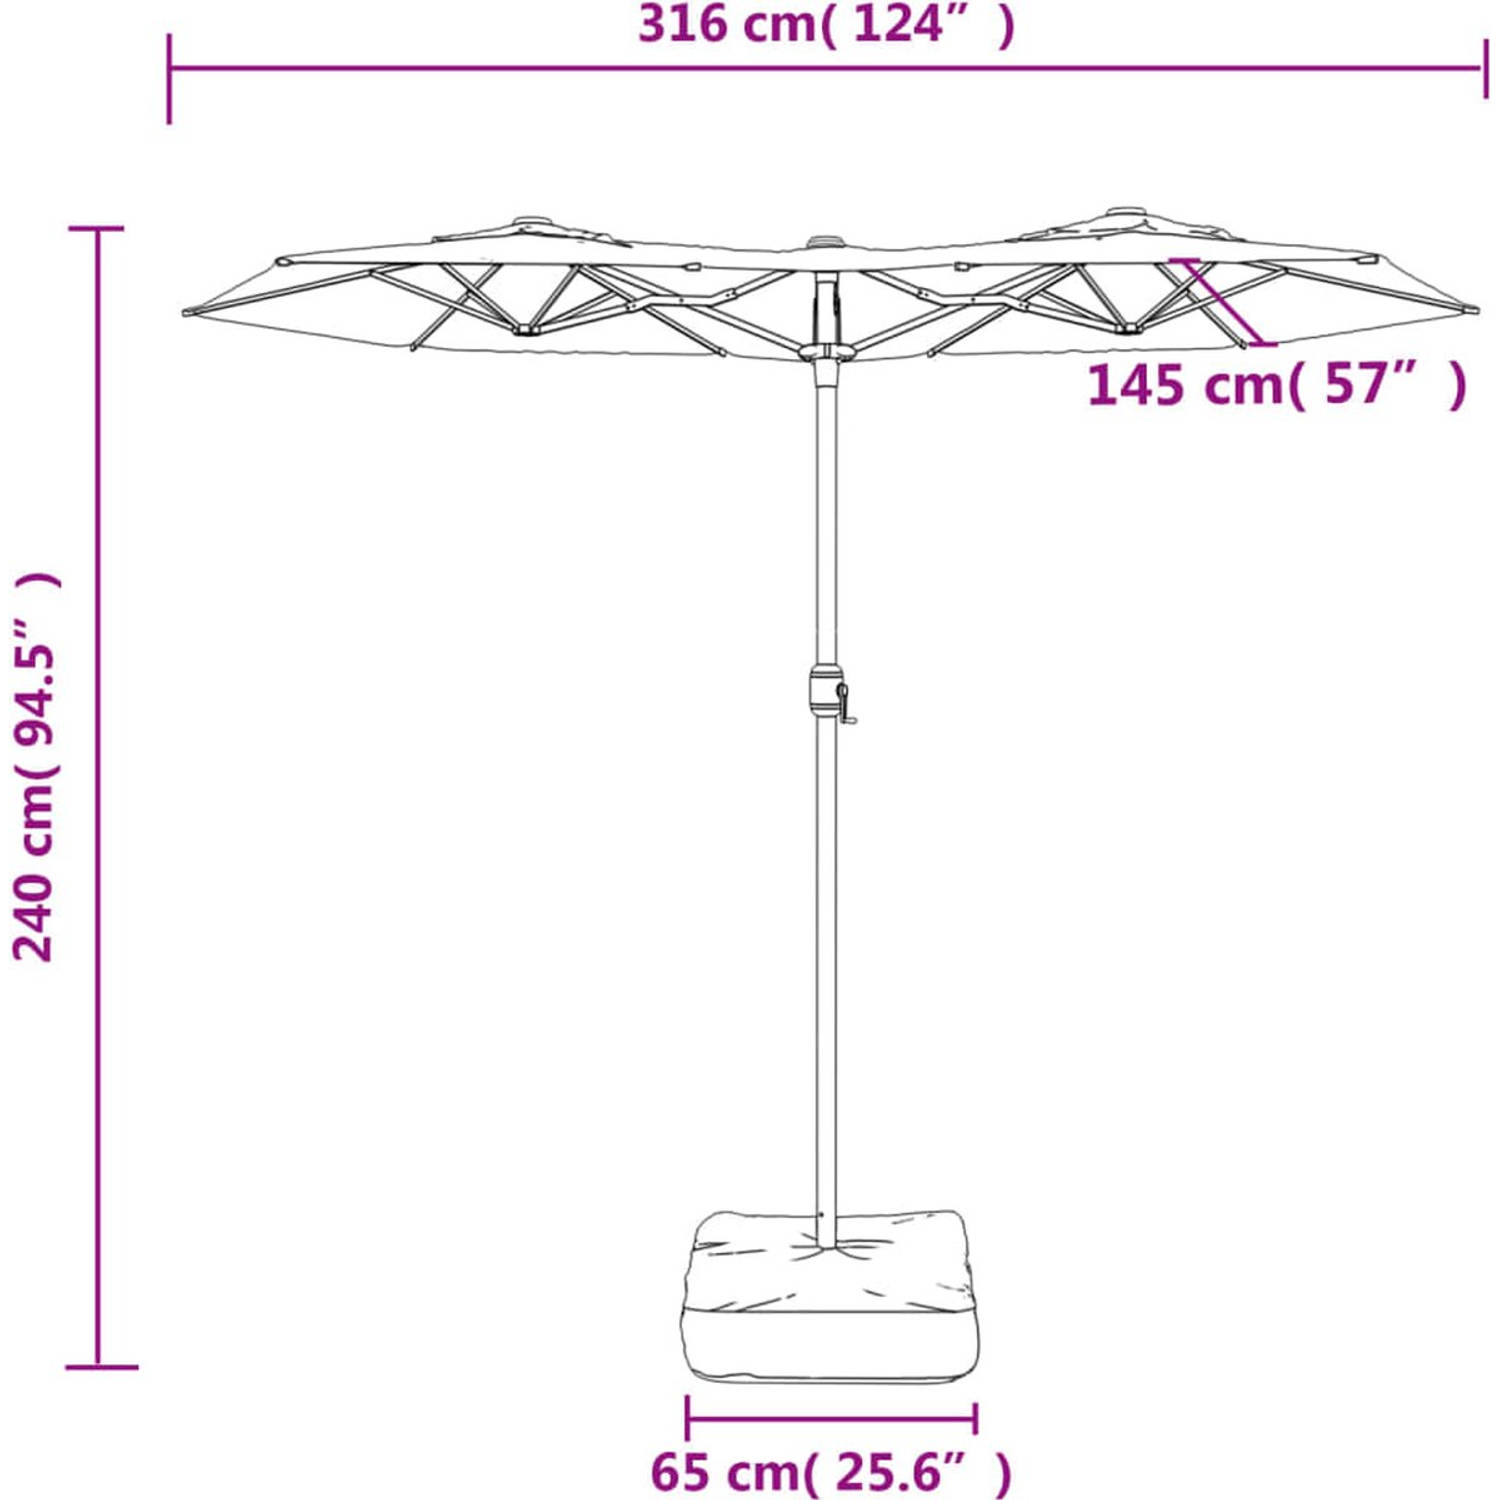 The Living Store Dubbele Parasol Terracotta/Donkergrijs - 316x145x240 cm - LED-verlichting